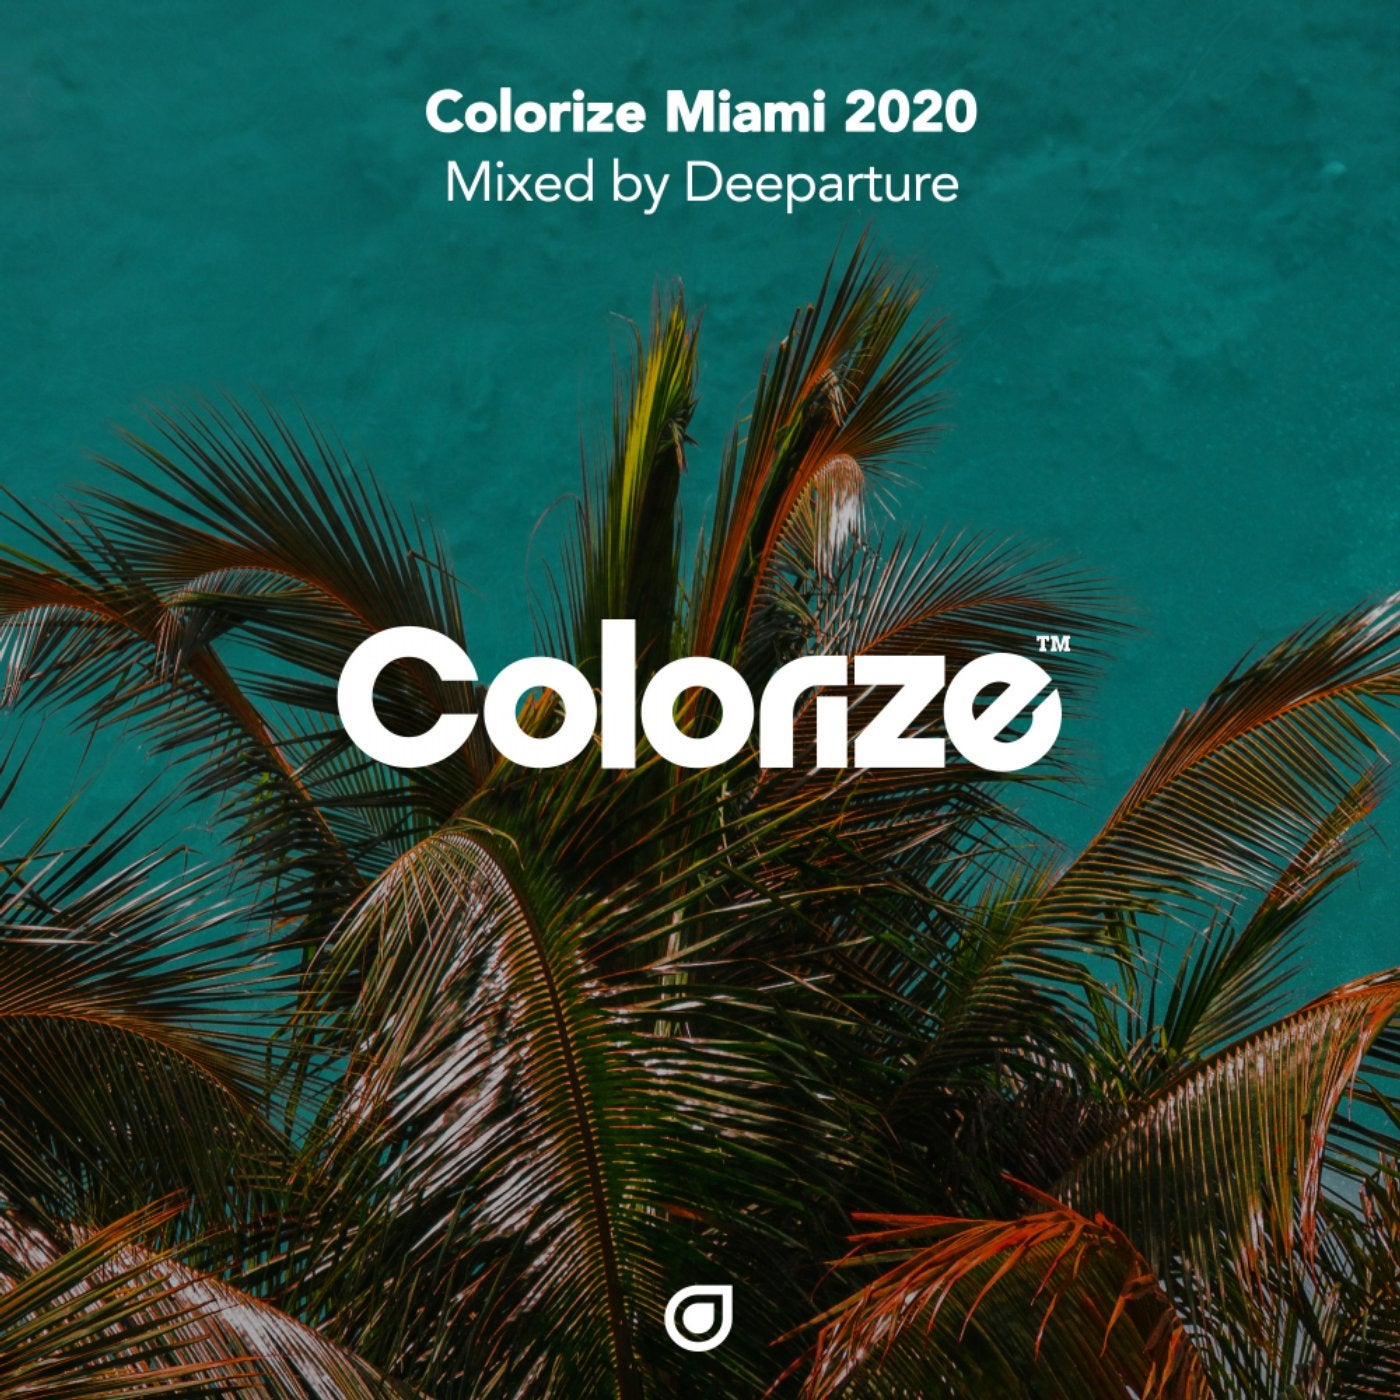 Colorize Miami 2020, mixed by Deeparture